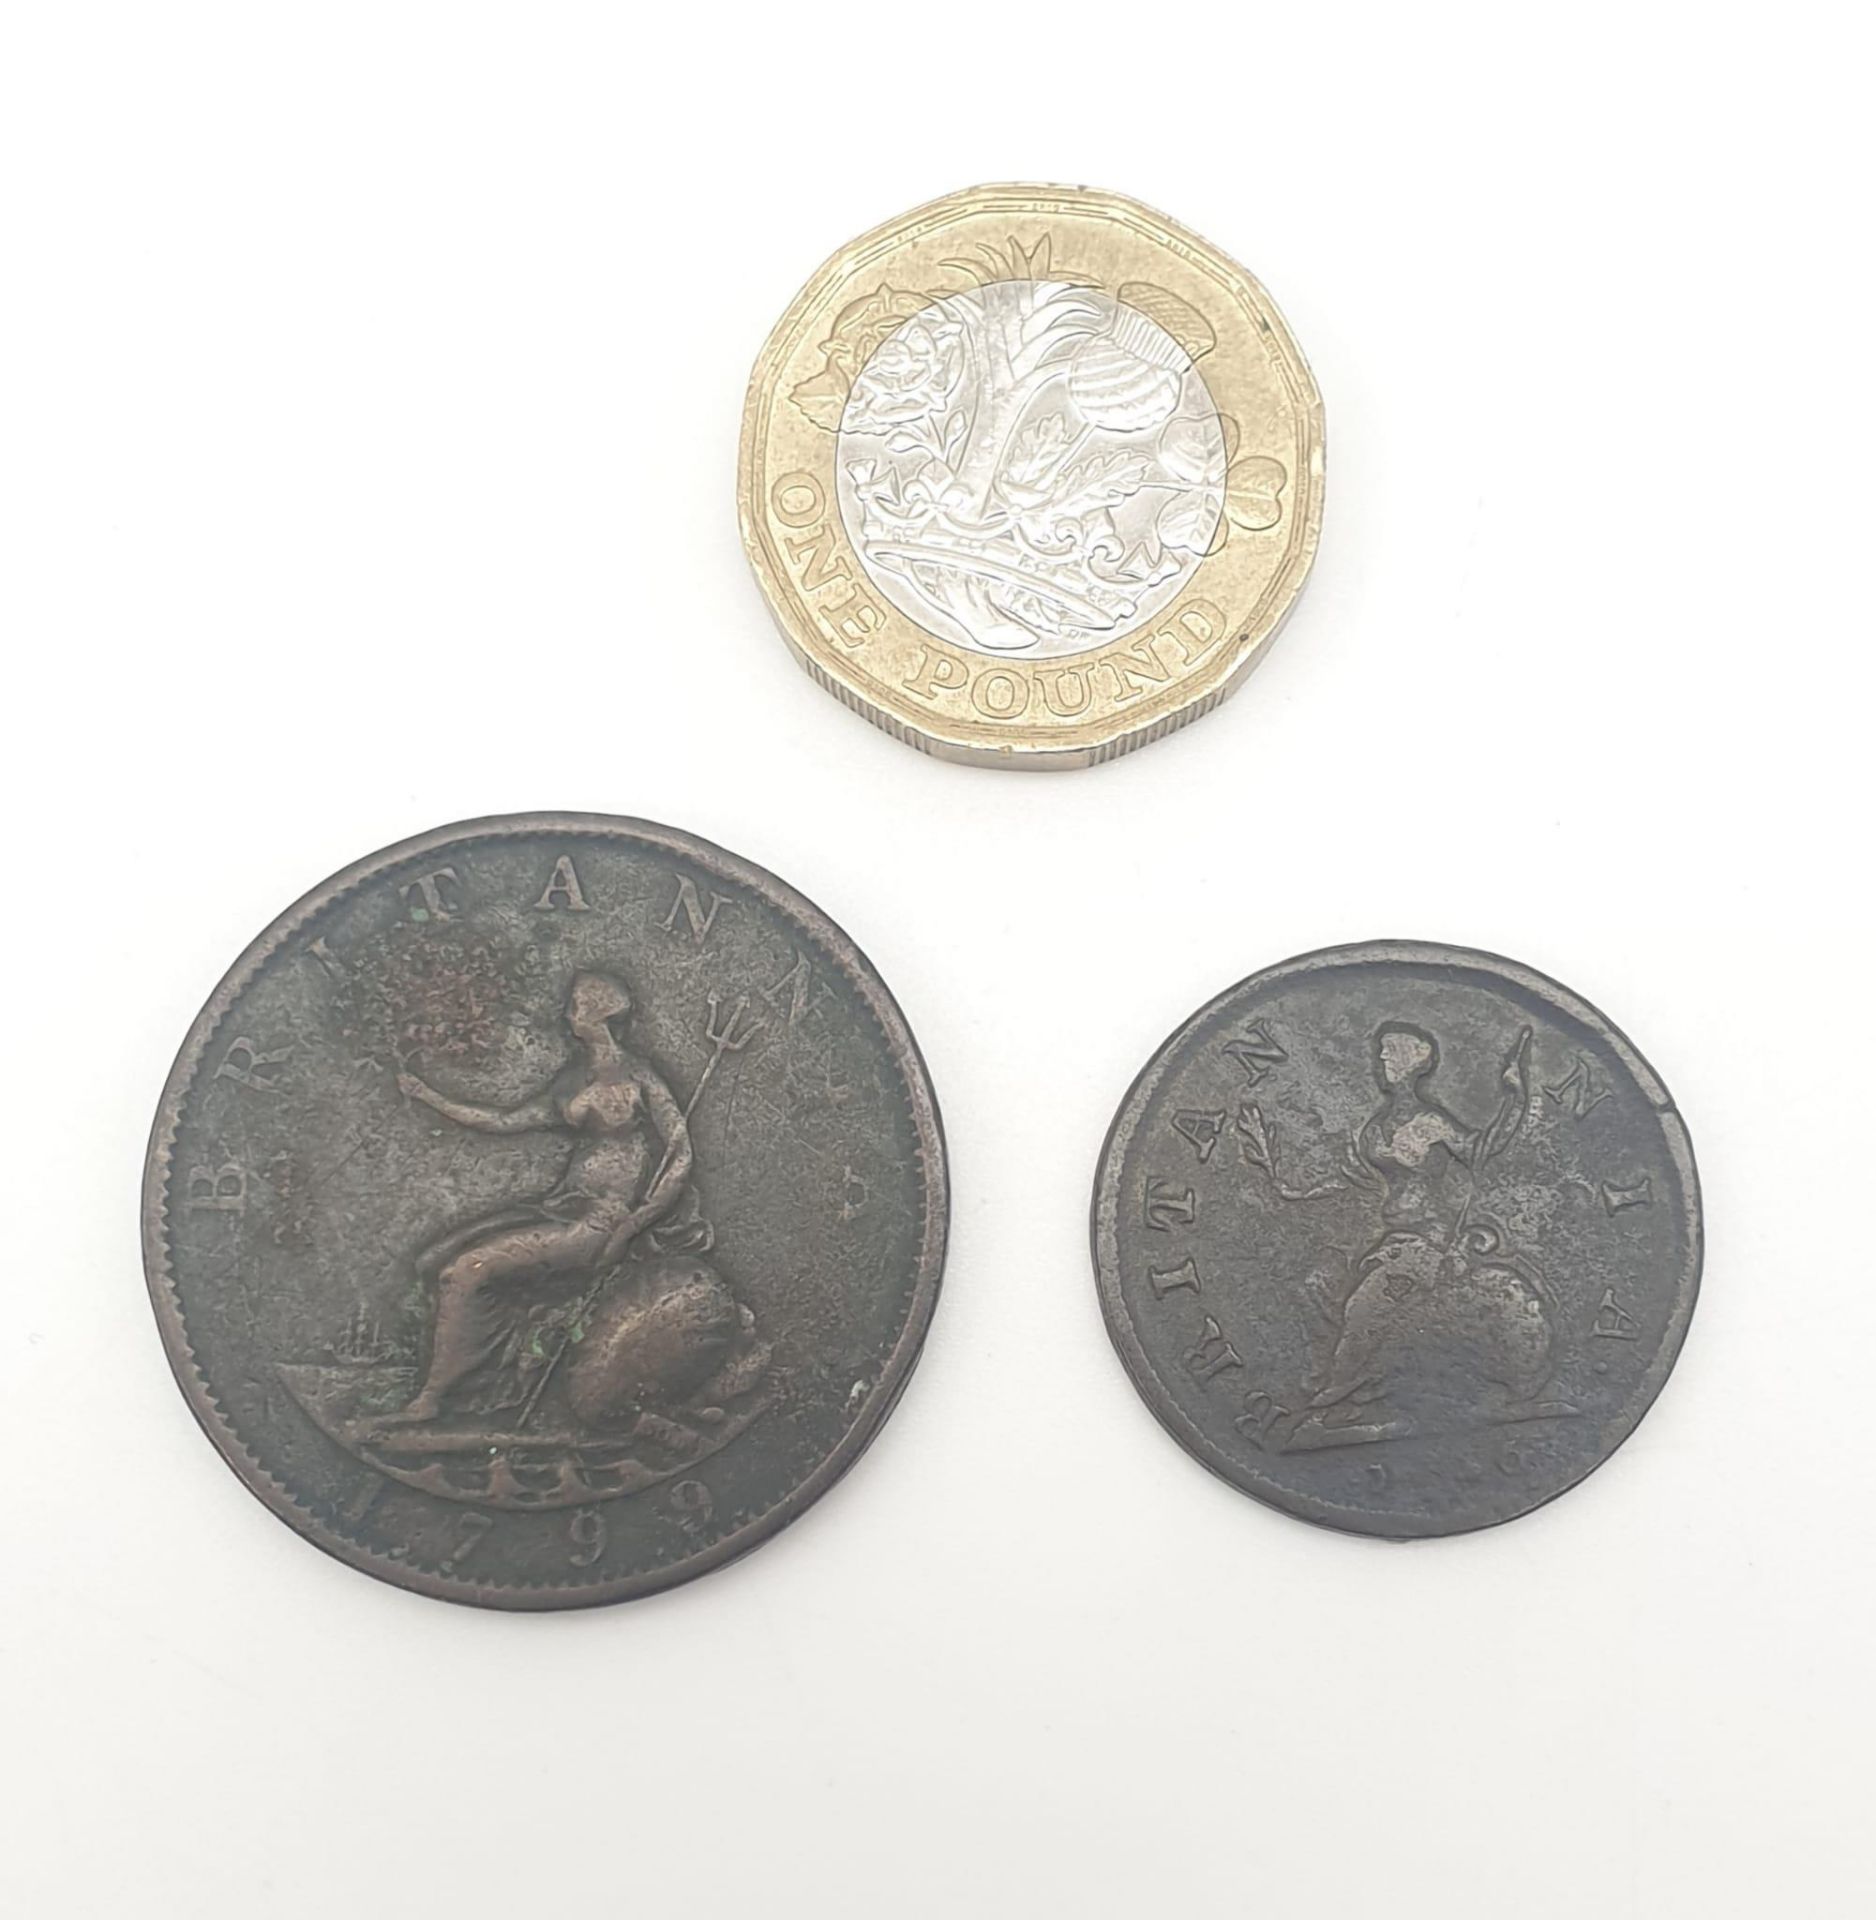 A George II 1747 Copper Farthing (NF) and a George III 1799 Copper One Pence Coin (NF). - Image 3 of 3